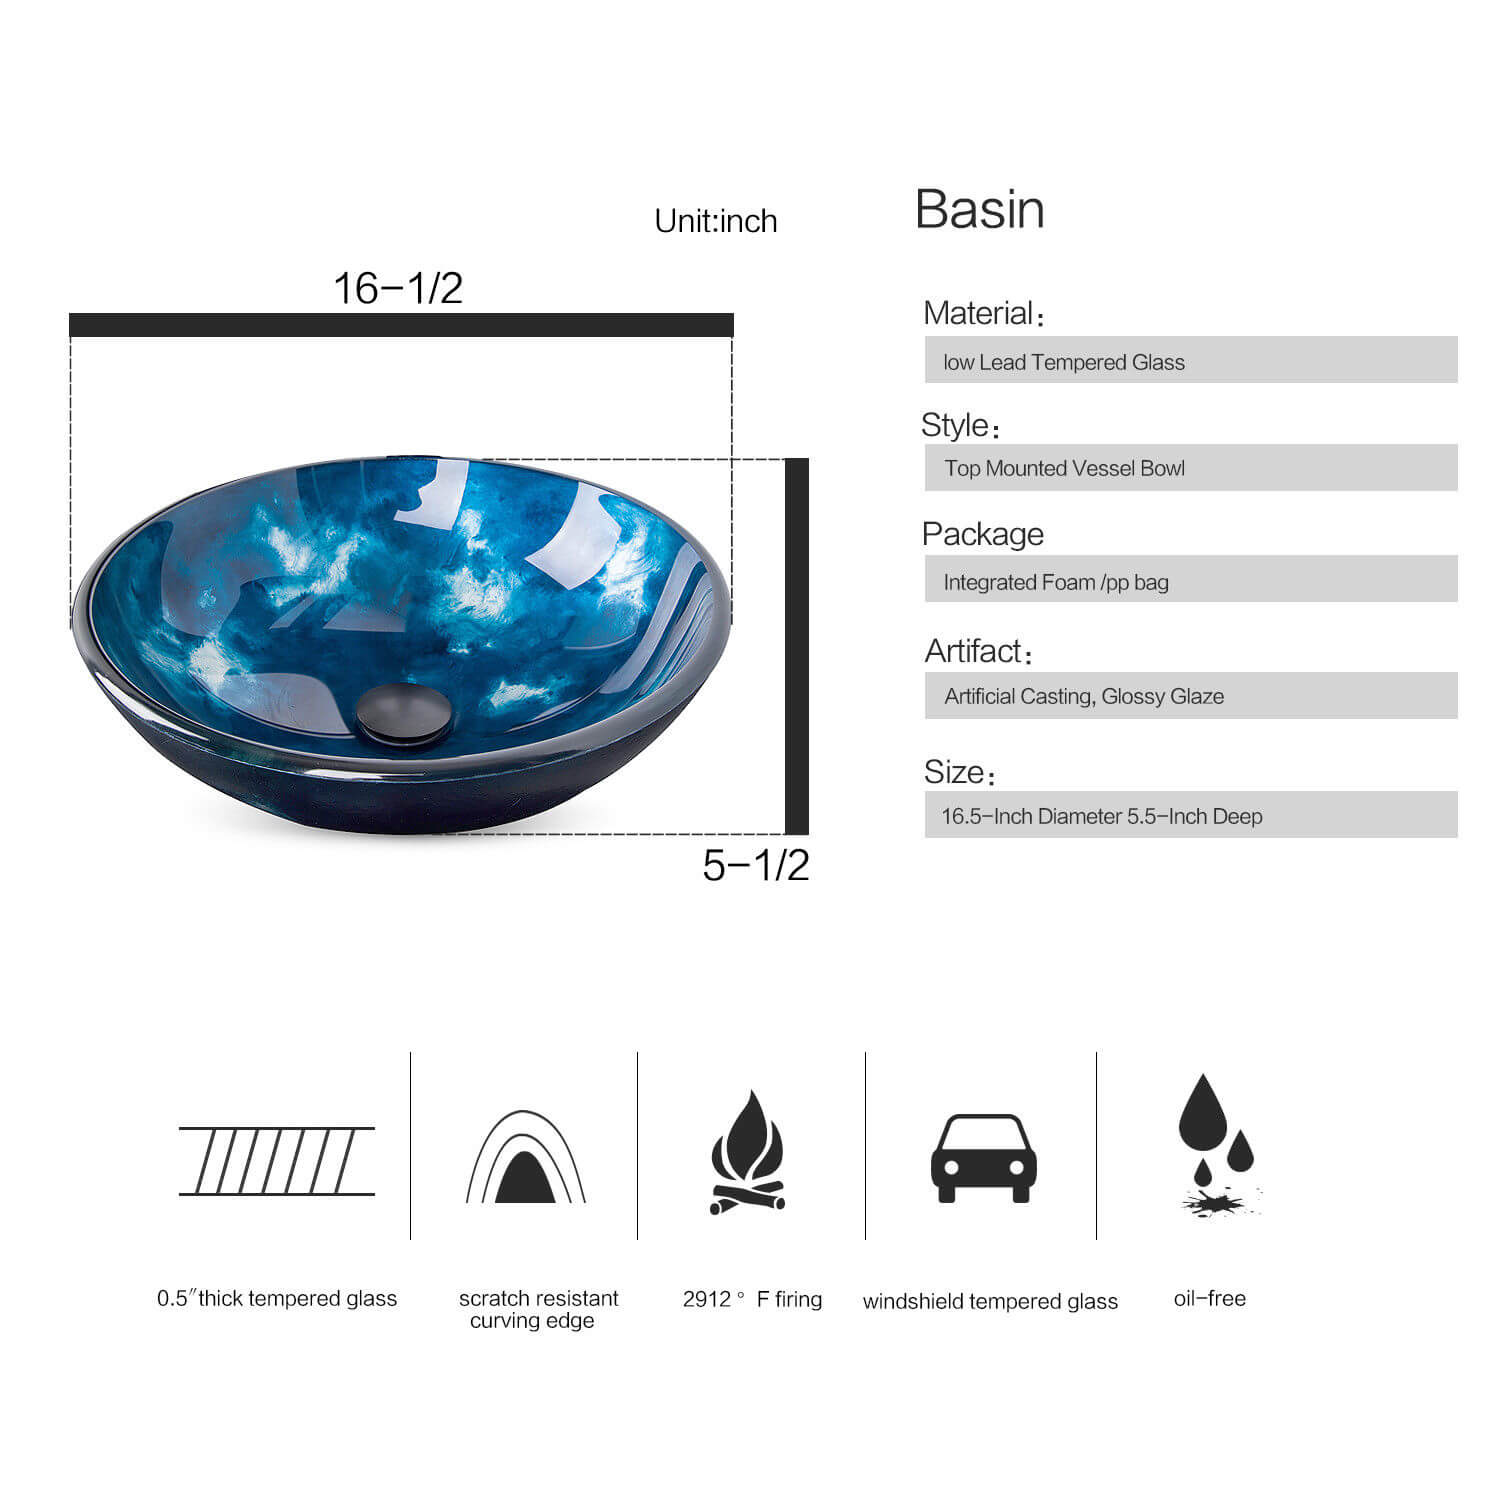 Elecwish blue glass sink BA2007 basin size and features